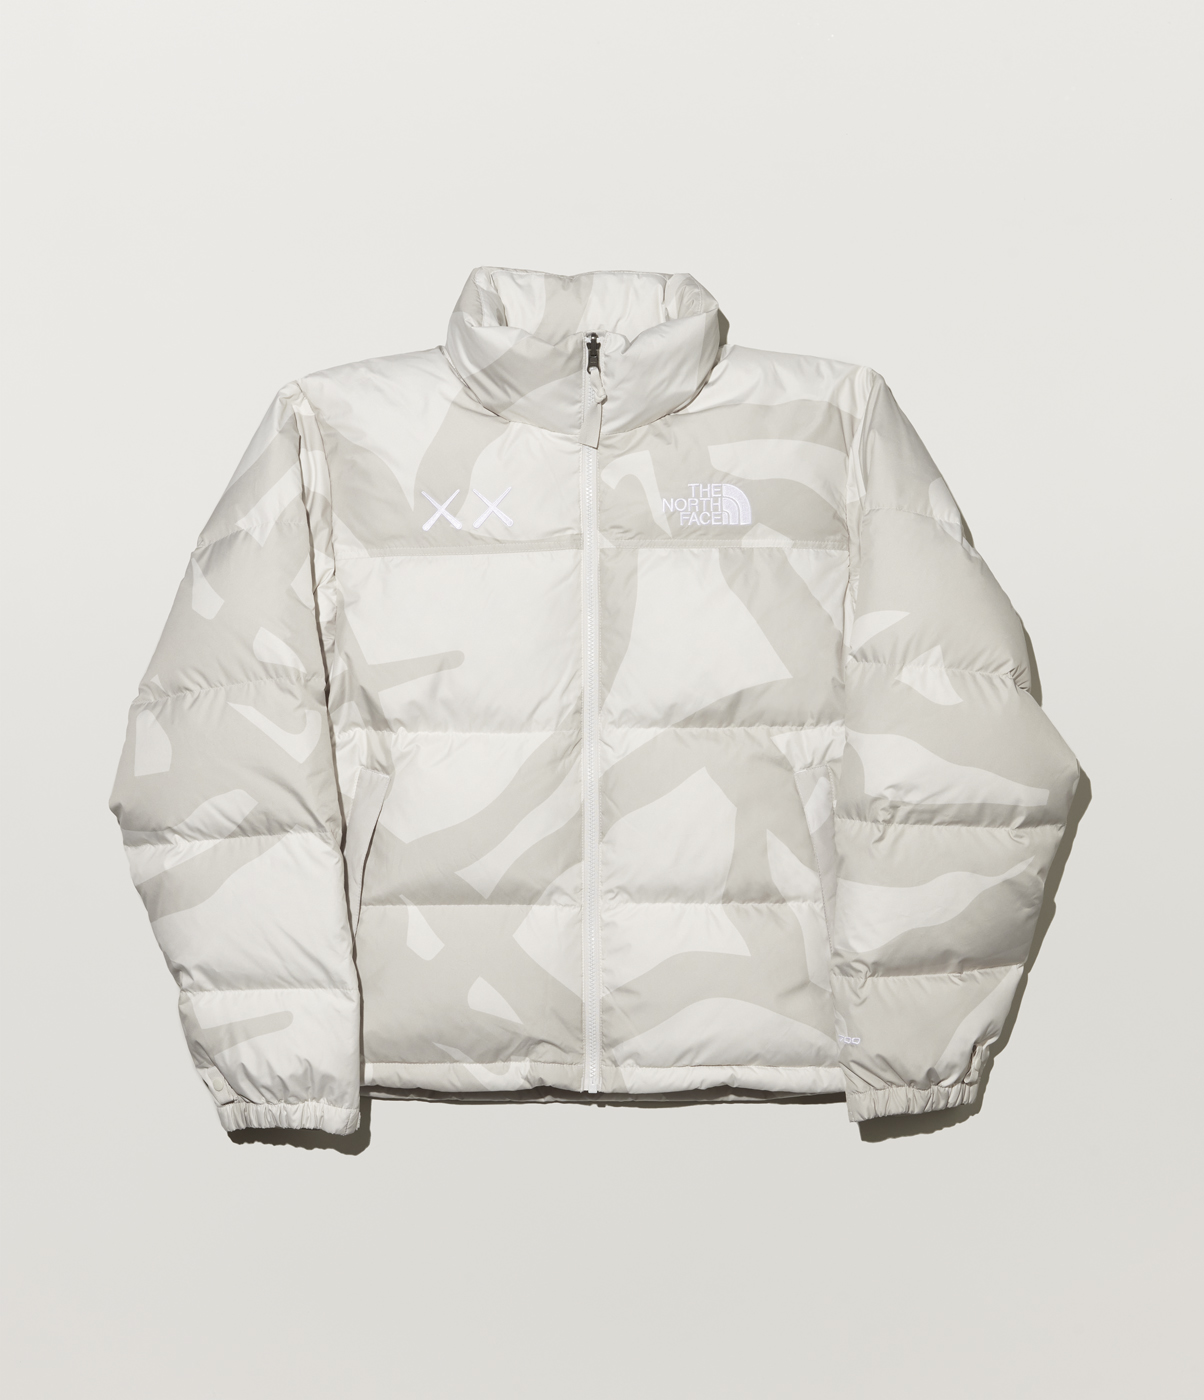 Best Style Releases: Supreme, The North Face, KAWS, Denim Tears, and More